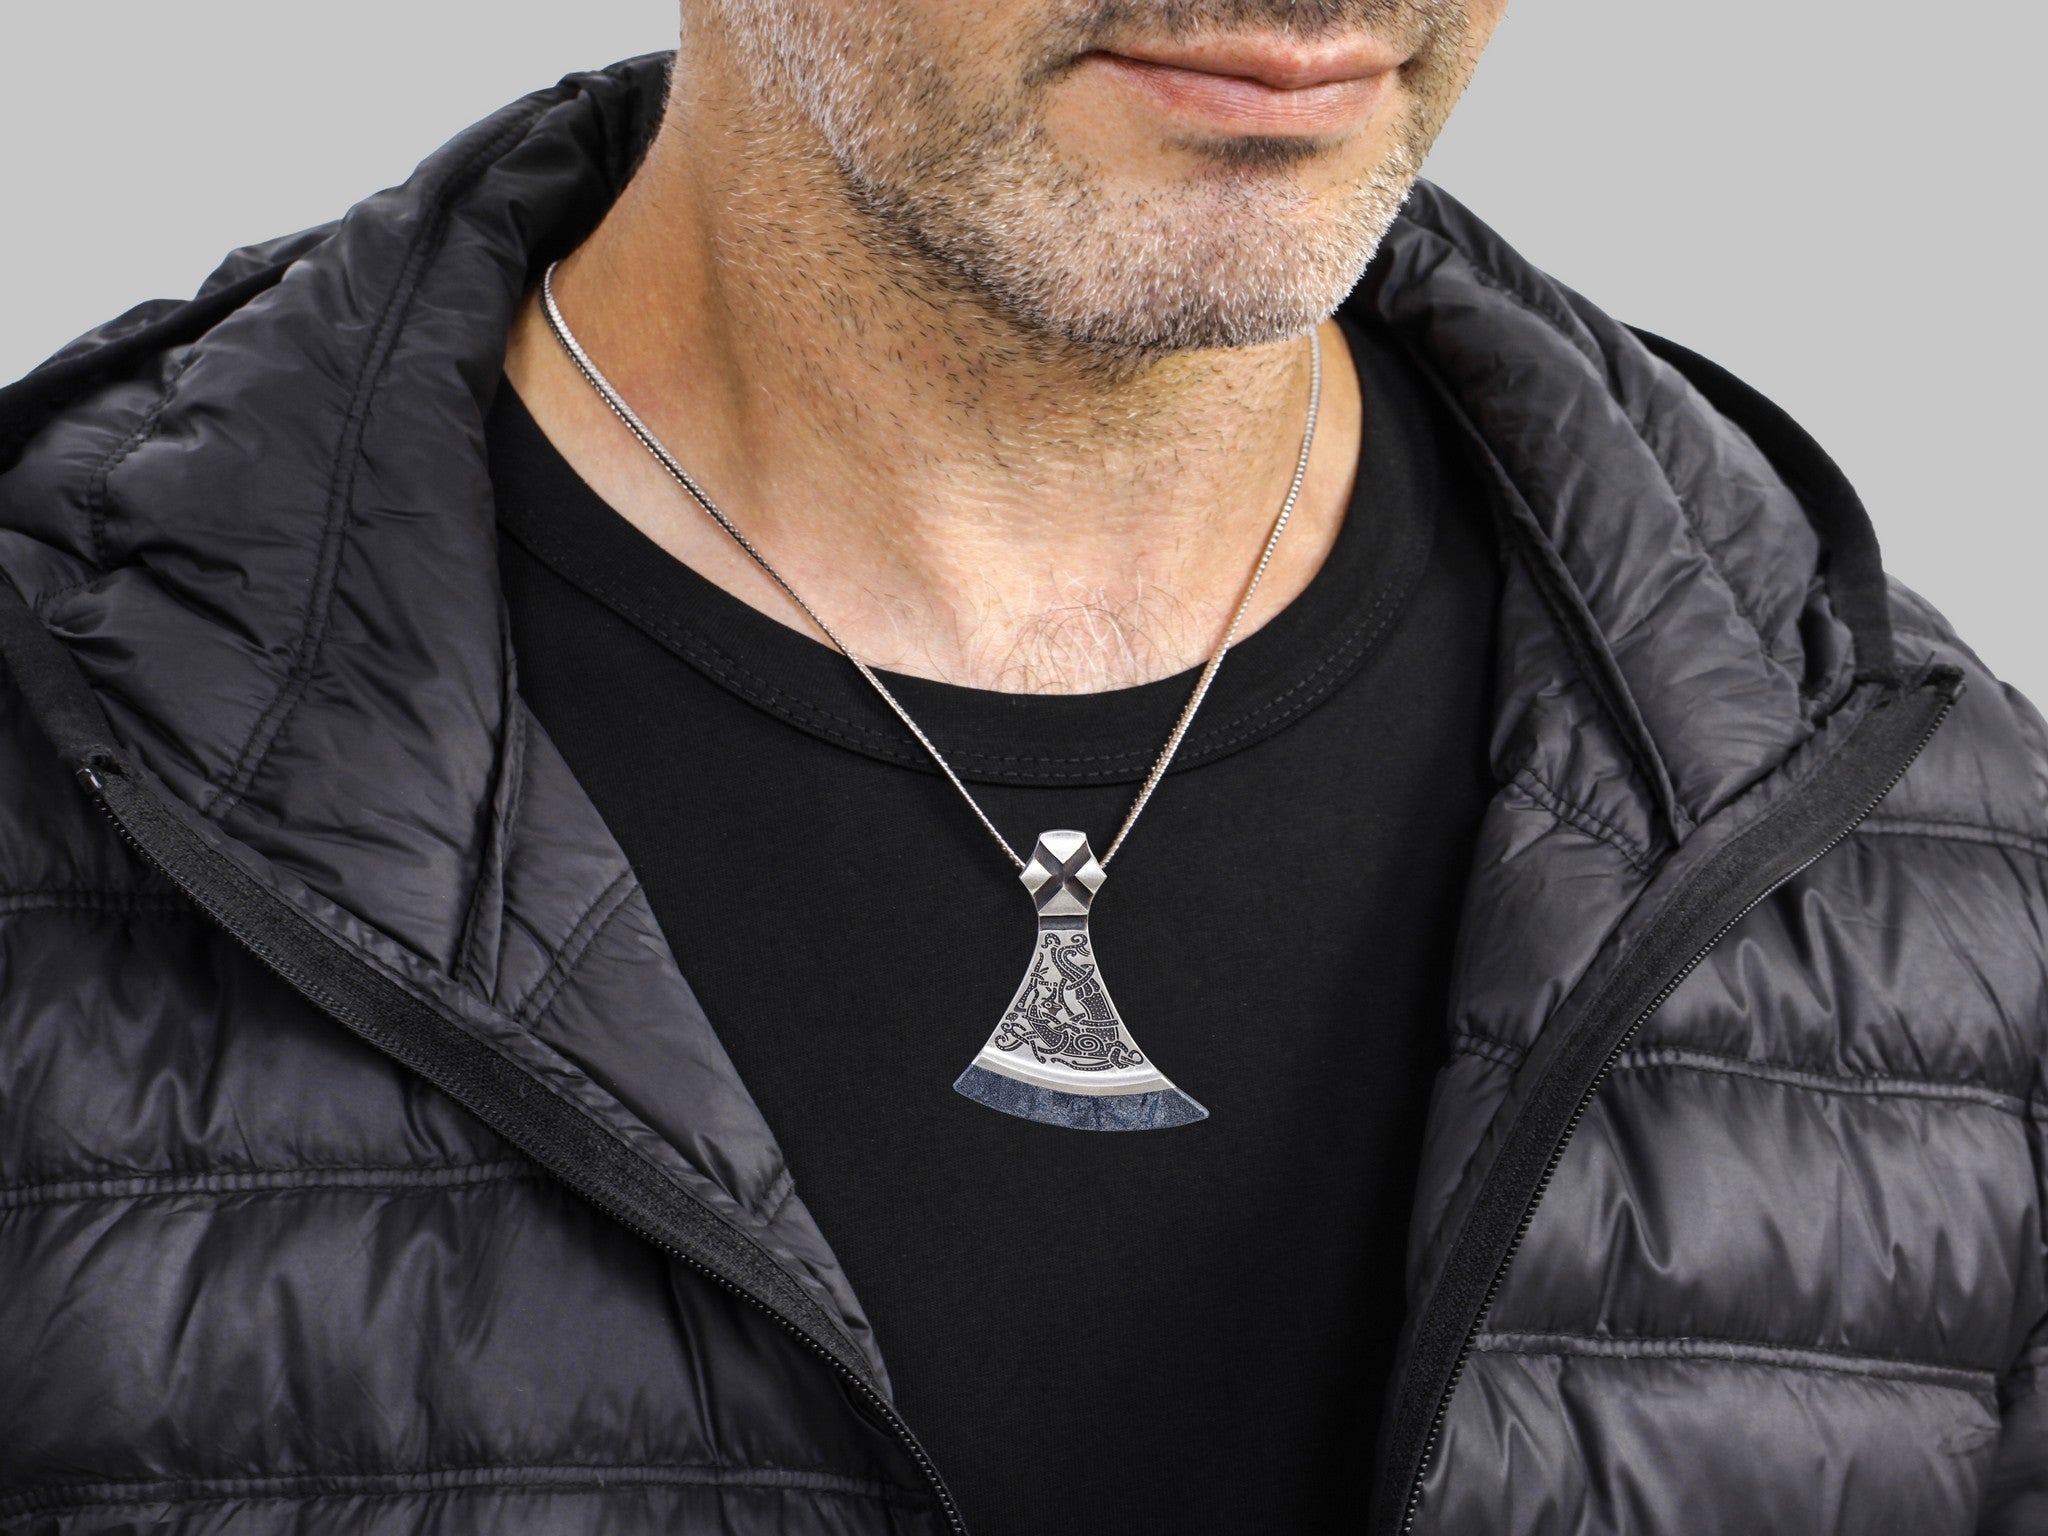 Mammen Style Axe Necklace with Black Obsidian Blade